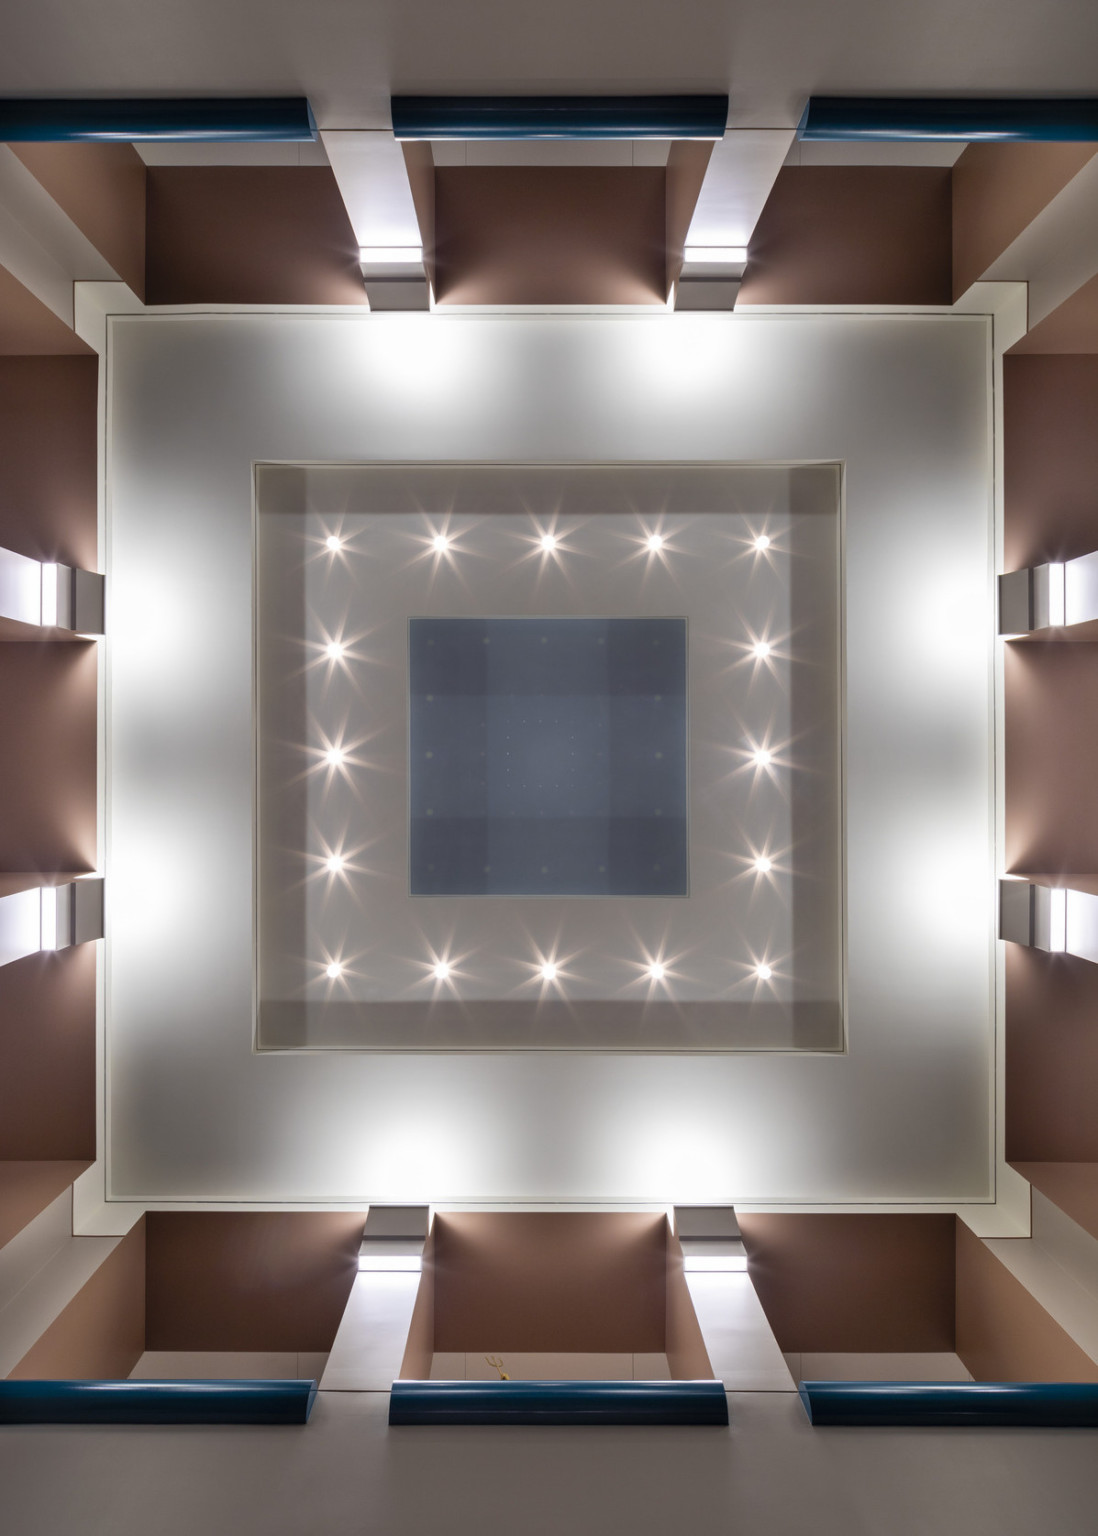 View of an interior ceiling from below. White columns meet at brown top edge of recessed square ceiling details and lights